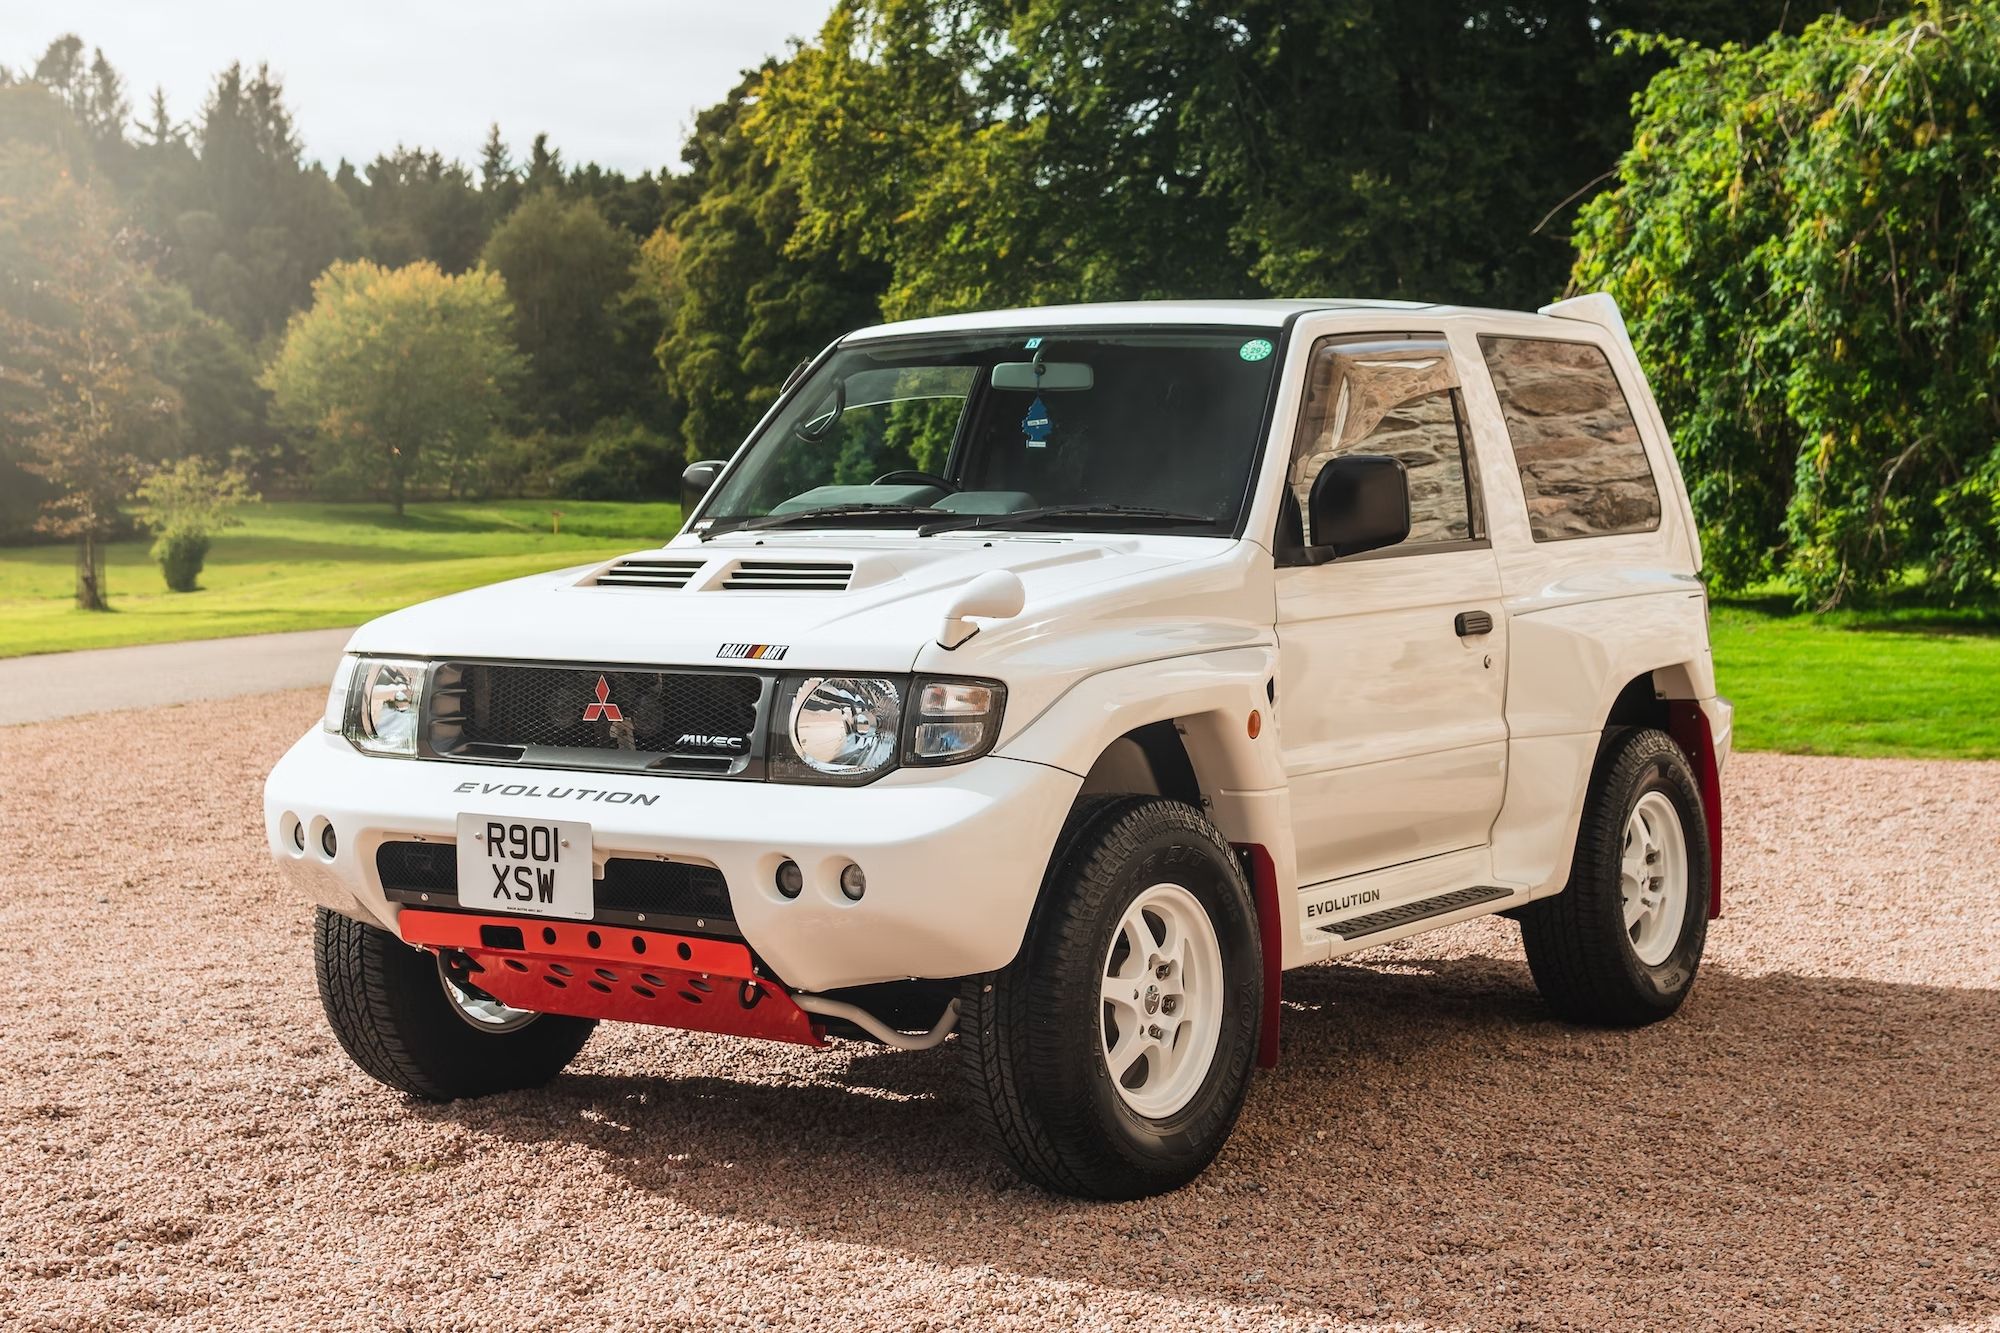 Buy This Glorious Pajero Out JDM Off-Road